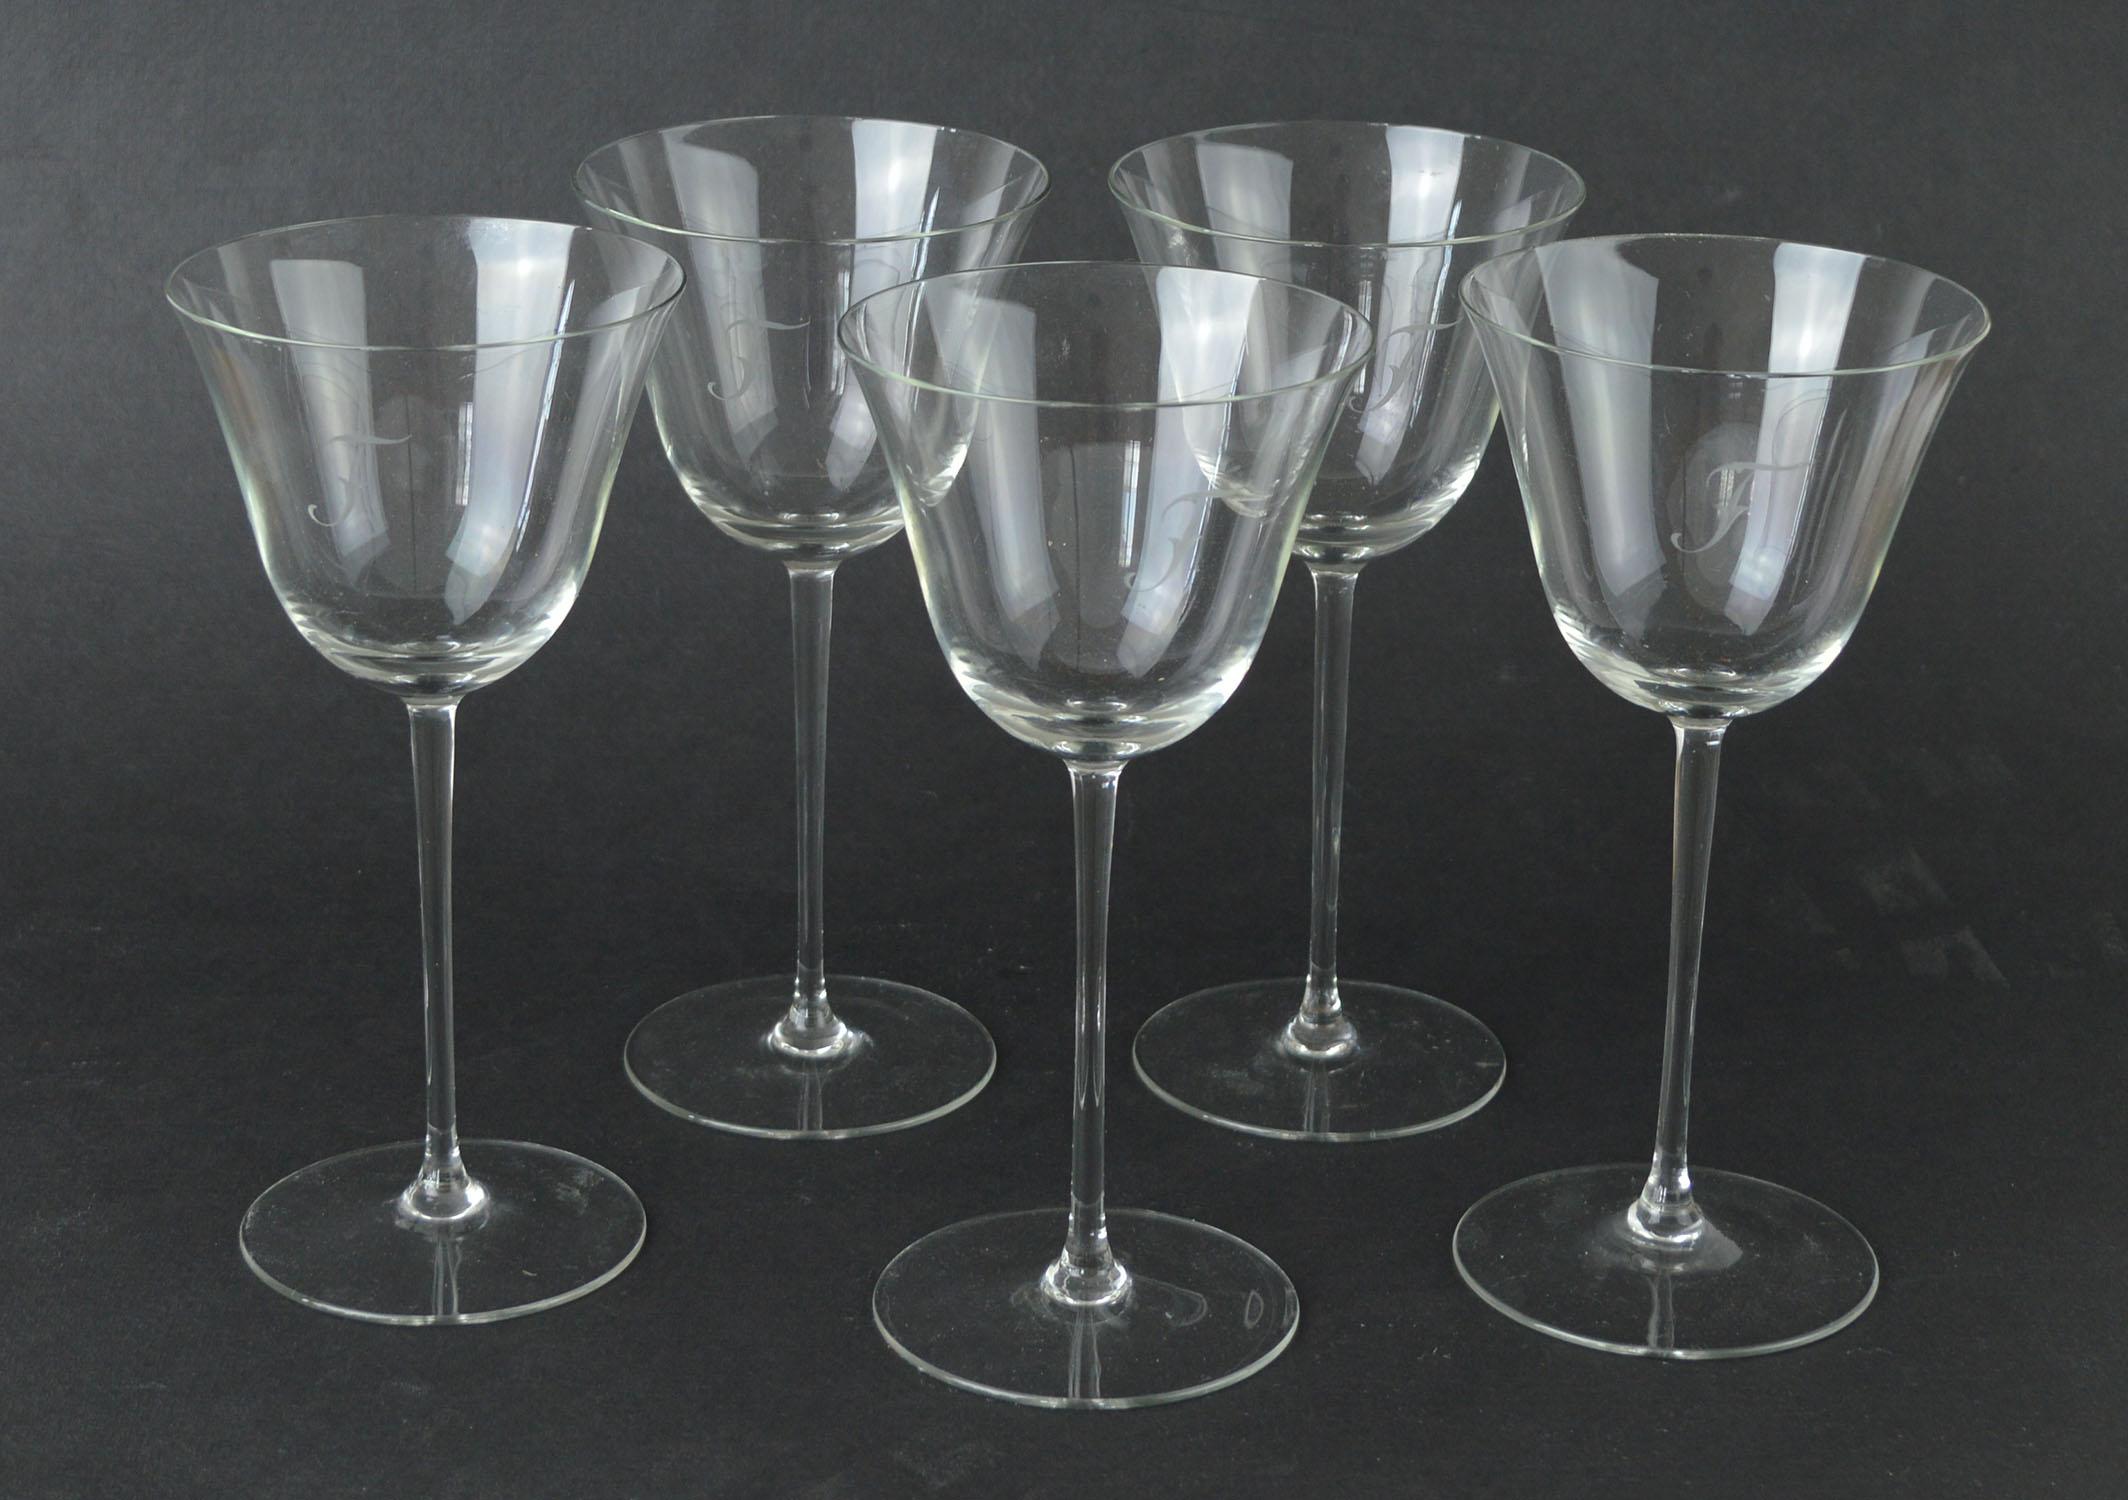 Really fine glass. Perfect condition.

Lovely shape. Monogrammed with an engraved initial 